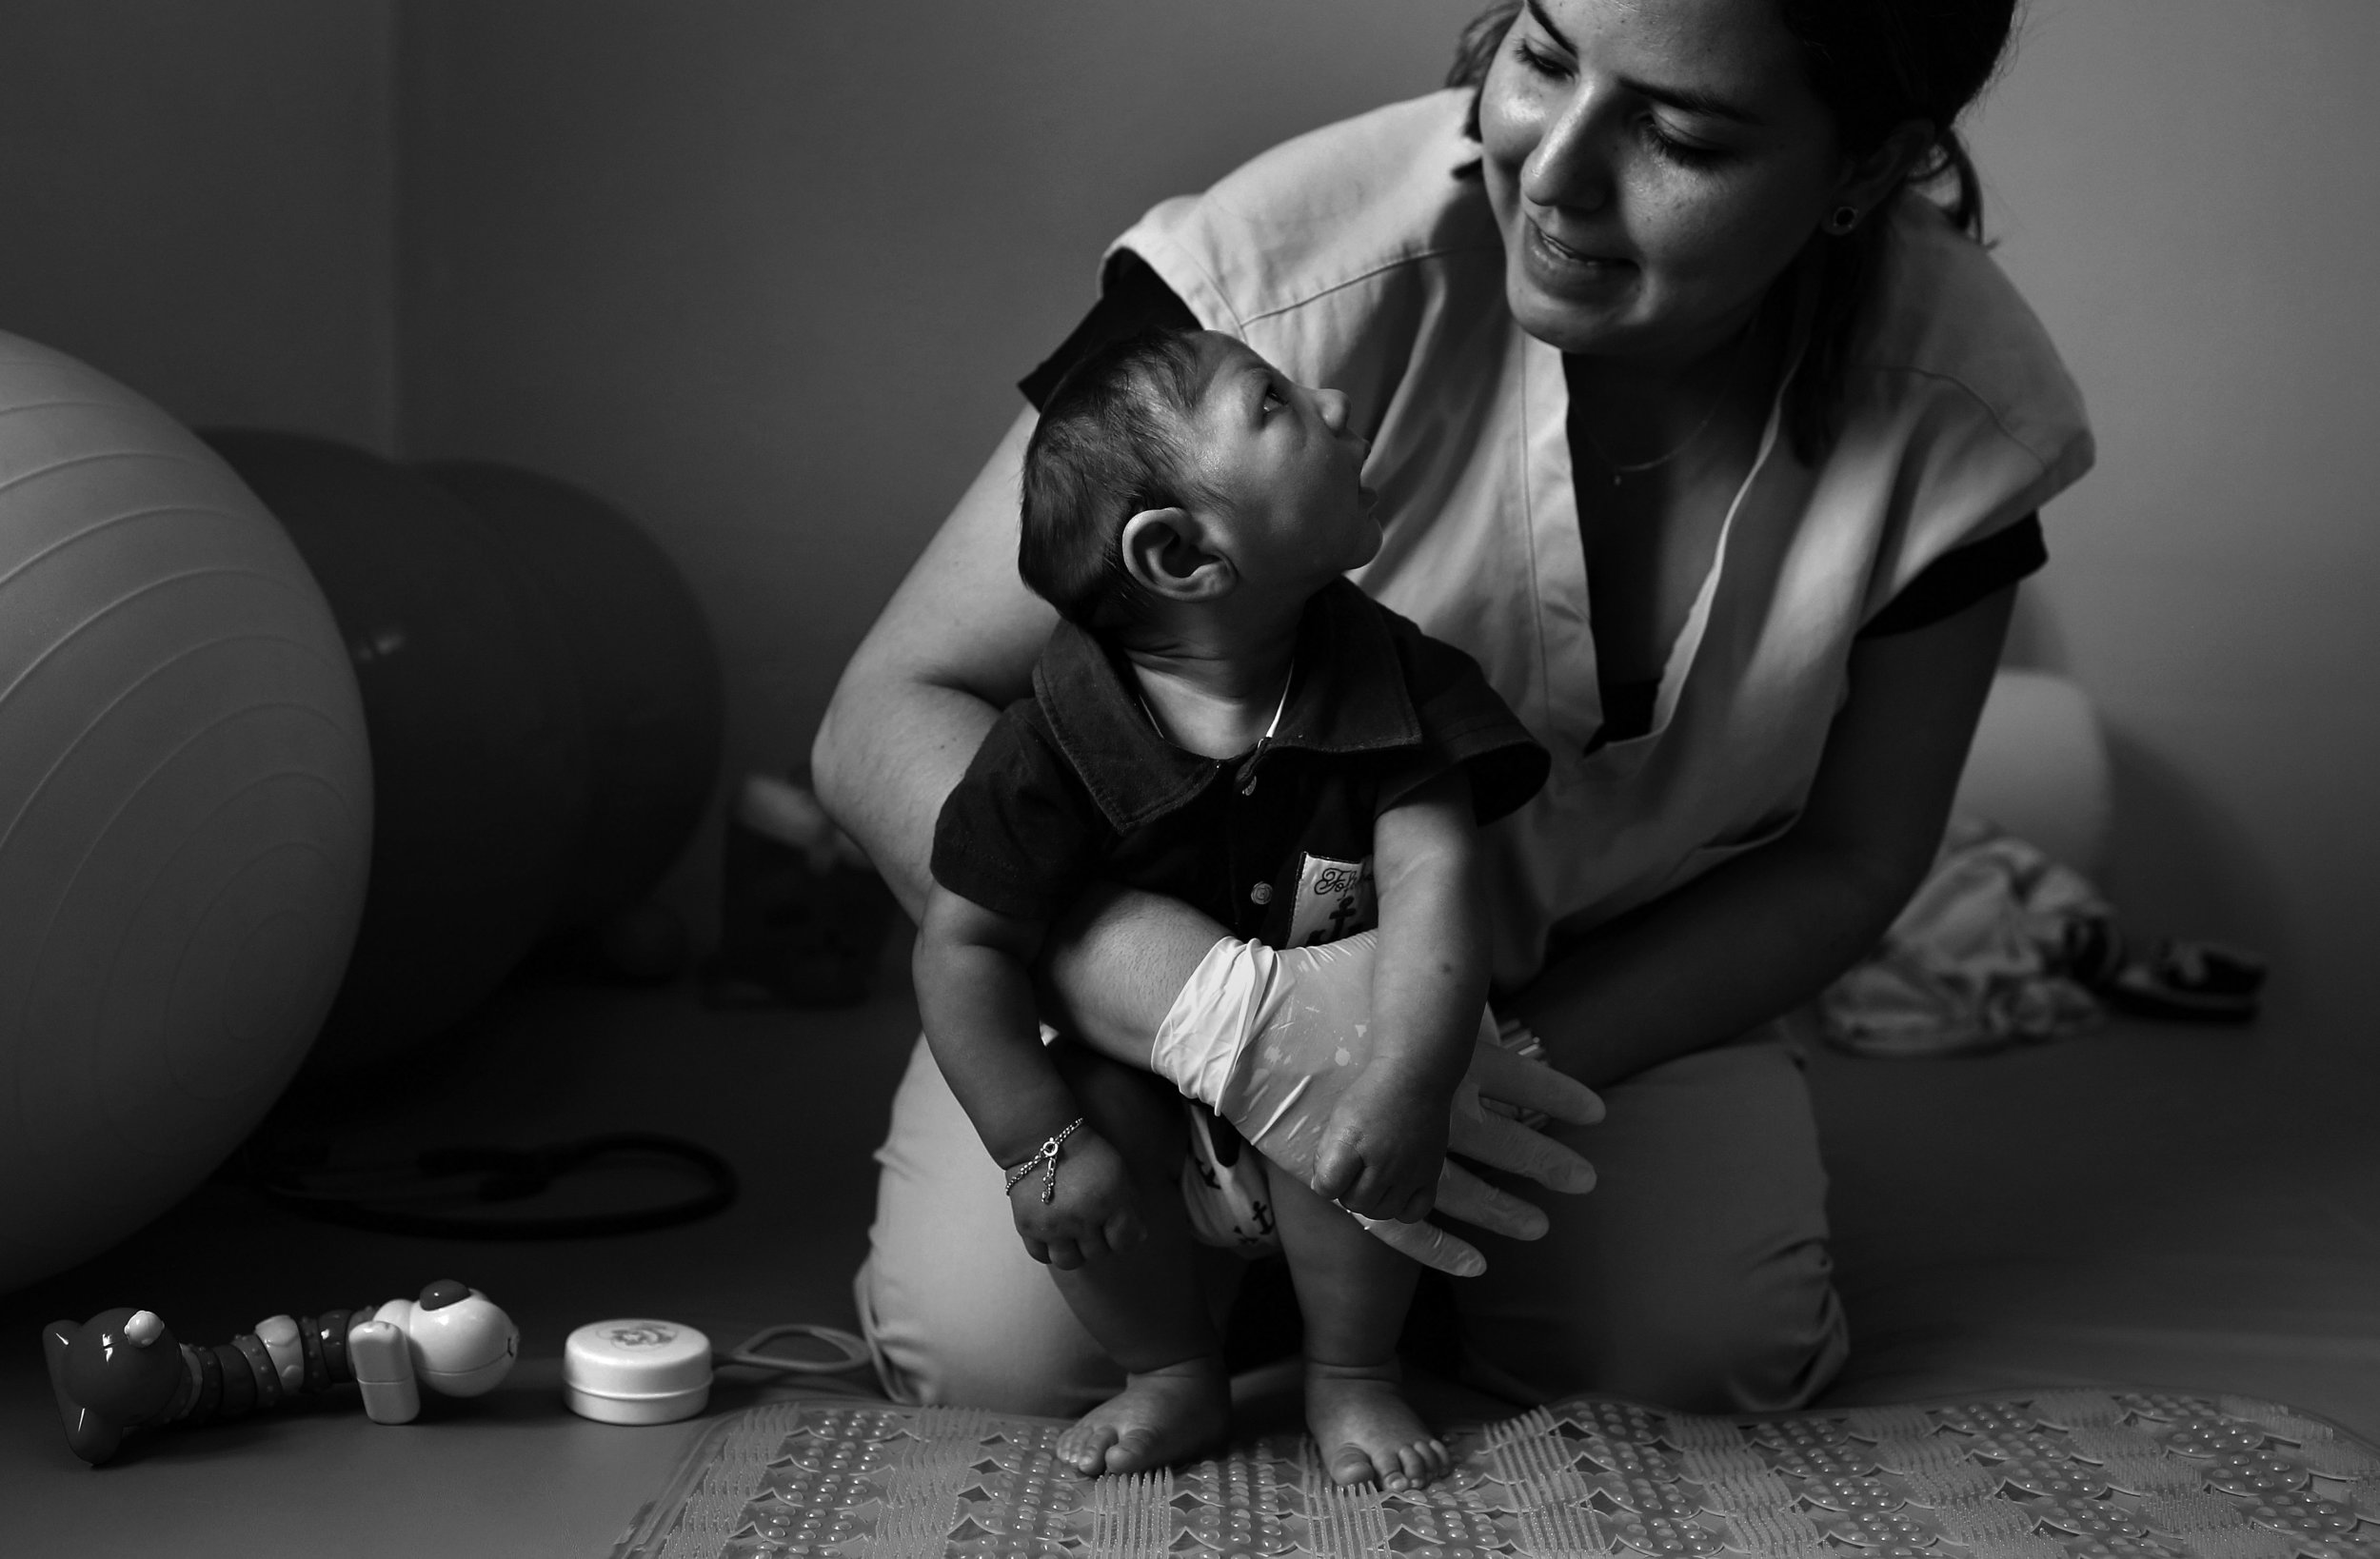  In the six years that physiotherapist Jeime Leal worked at a pediatrician’s office, she never had a microcephaly case. When she started at Pedro I Municipal Hospital in December, there were seven cases in the wing that was created for patients with 